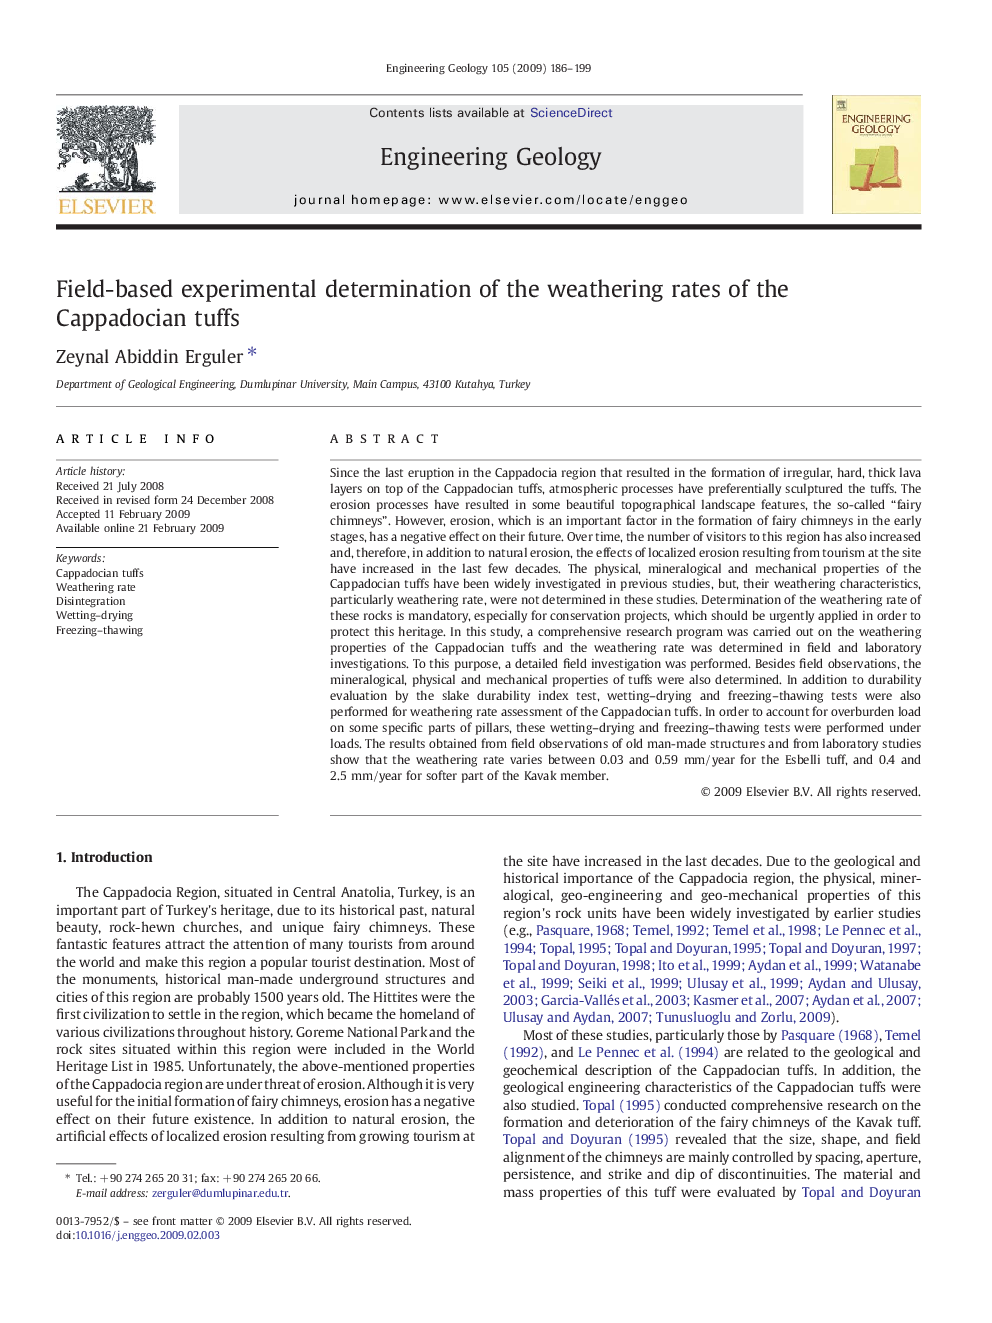 Field-based experimental determination of the weathering rates of the Cappadocian tuffs